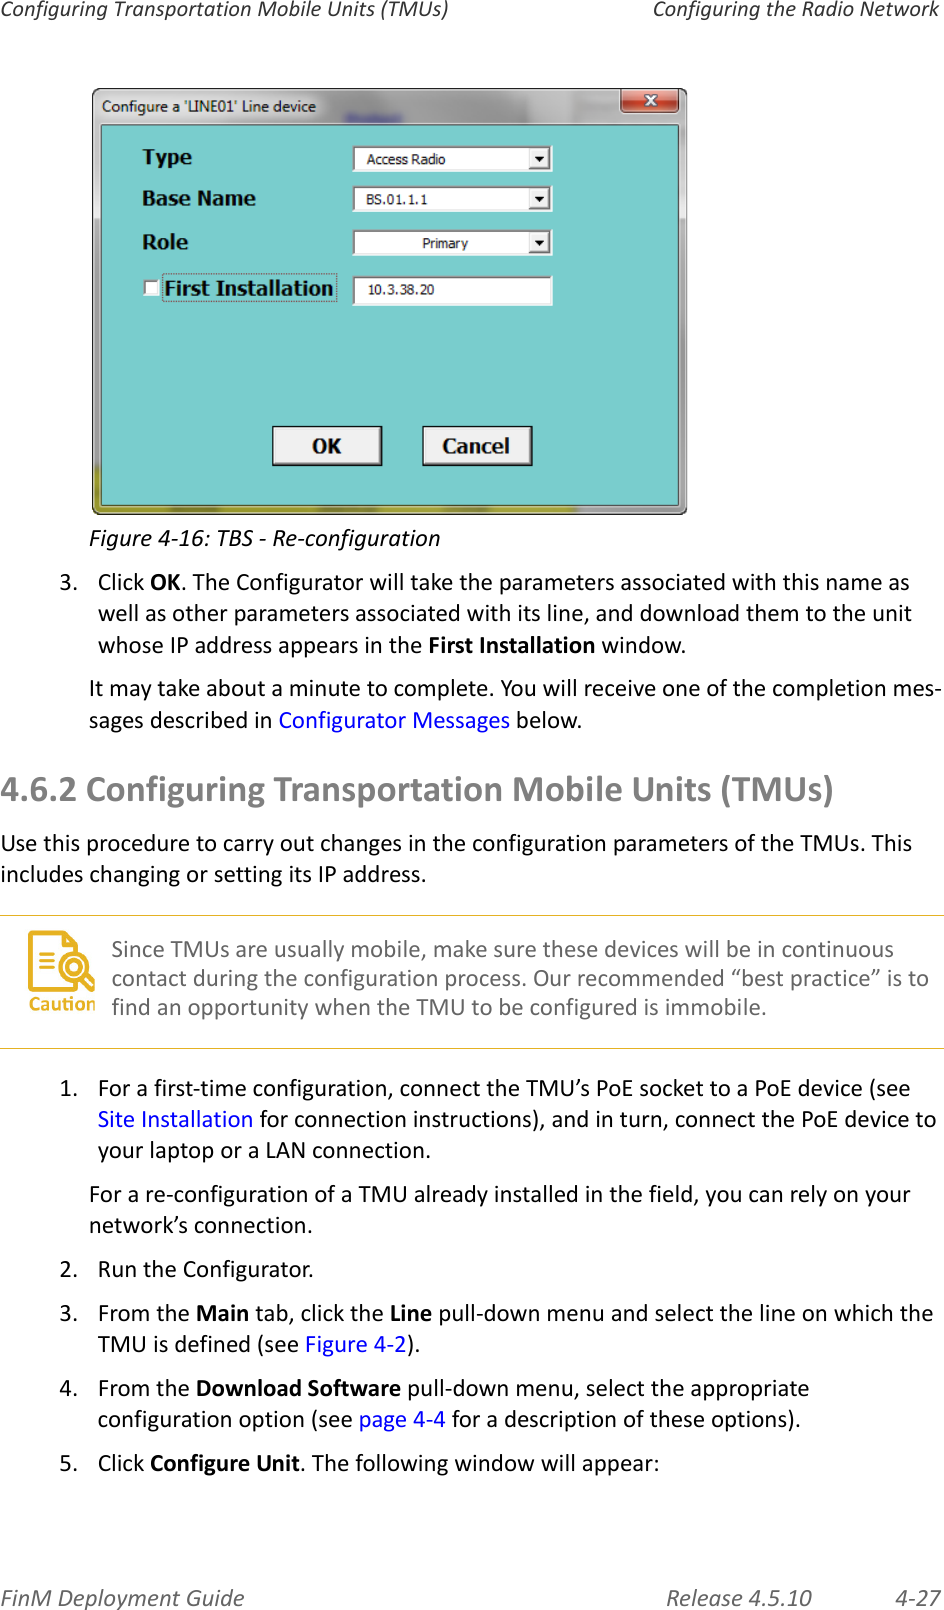 FinMDeploymentGuide Release4.5.10 4‐27ConfiguringTransportationMobileUnits(TMUs) ConfiguringtheRadioNetworkFigure4‐16:TBS‐Re‐configuration3. ClickOK.TheConfiguratorwilltaketheparametersassociatedwiththisnameaswellasotherparametersassociatedwithitsline,anddownloadthemtotheunitwhoseIPaddressappearsintheFirstInstallationwindow.Itmaytakeaboutaminutetocomplete.Youwillreceiveoneofthecompletionmes‐sagesdescribedinConfiguratorMessagesbelow.4.6.2ConfiguringTransportationMobileUnits(TMUs)UsethisproceduretocarryoutchangesintheconfigurationparametersoftheTMUs.ThisincludeschangingorsettingitsIPaddress.1.Forafirst‐timeconfiguration,connecttheTMU’sPoEsockettoaPoEdevice(seeSiteInstallationforconnectioninstructions),andinturn,connectthePoEdevicetoyourlaptoporaLANconnection.Forare‐configurationofaTMUalreadyinstalledinthefield,youcanrelyonyournetwork’sconnection.2. RuntheConfigurator.3. FromtheMaintab,clicktheLinepull‐downmenuandselectthelineonwhichtheTMUisdefined(seeFigure 4‐2).4. FromtheDownloadSoftwarepull‐downmenu,selecttheappropriateconfigurationoption(seepage 4‐4foradescriptionoftheseoptions).5. ClickConfigureUnit.Thefollowingwindowwillappear:SinceTMUsareusuallymobile,makesurethesedeviceswillbeincontinuouscontactduringtheconfigurationprocess.Ourrecommended“bestpractice”istofindanopportunitywhentheTMUtobeconfiguredisimmobile.